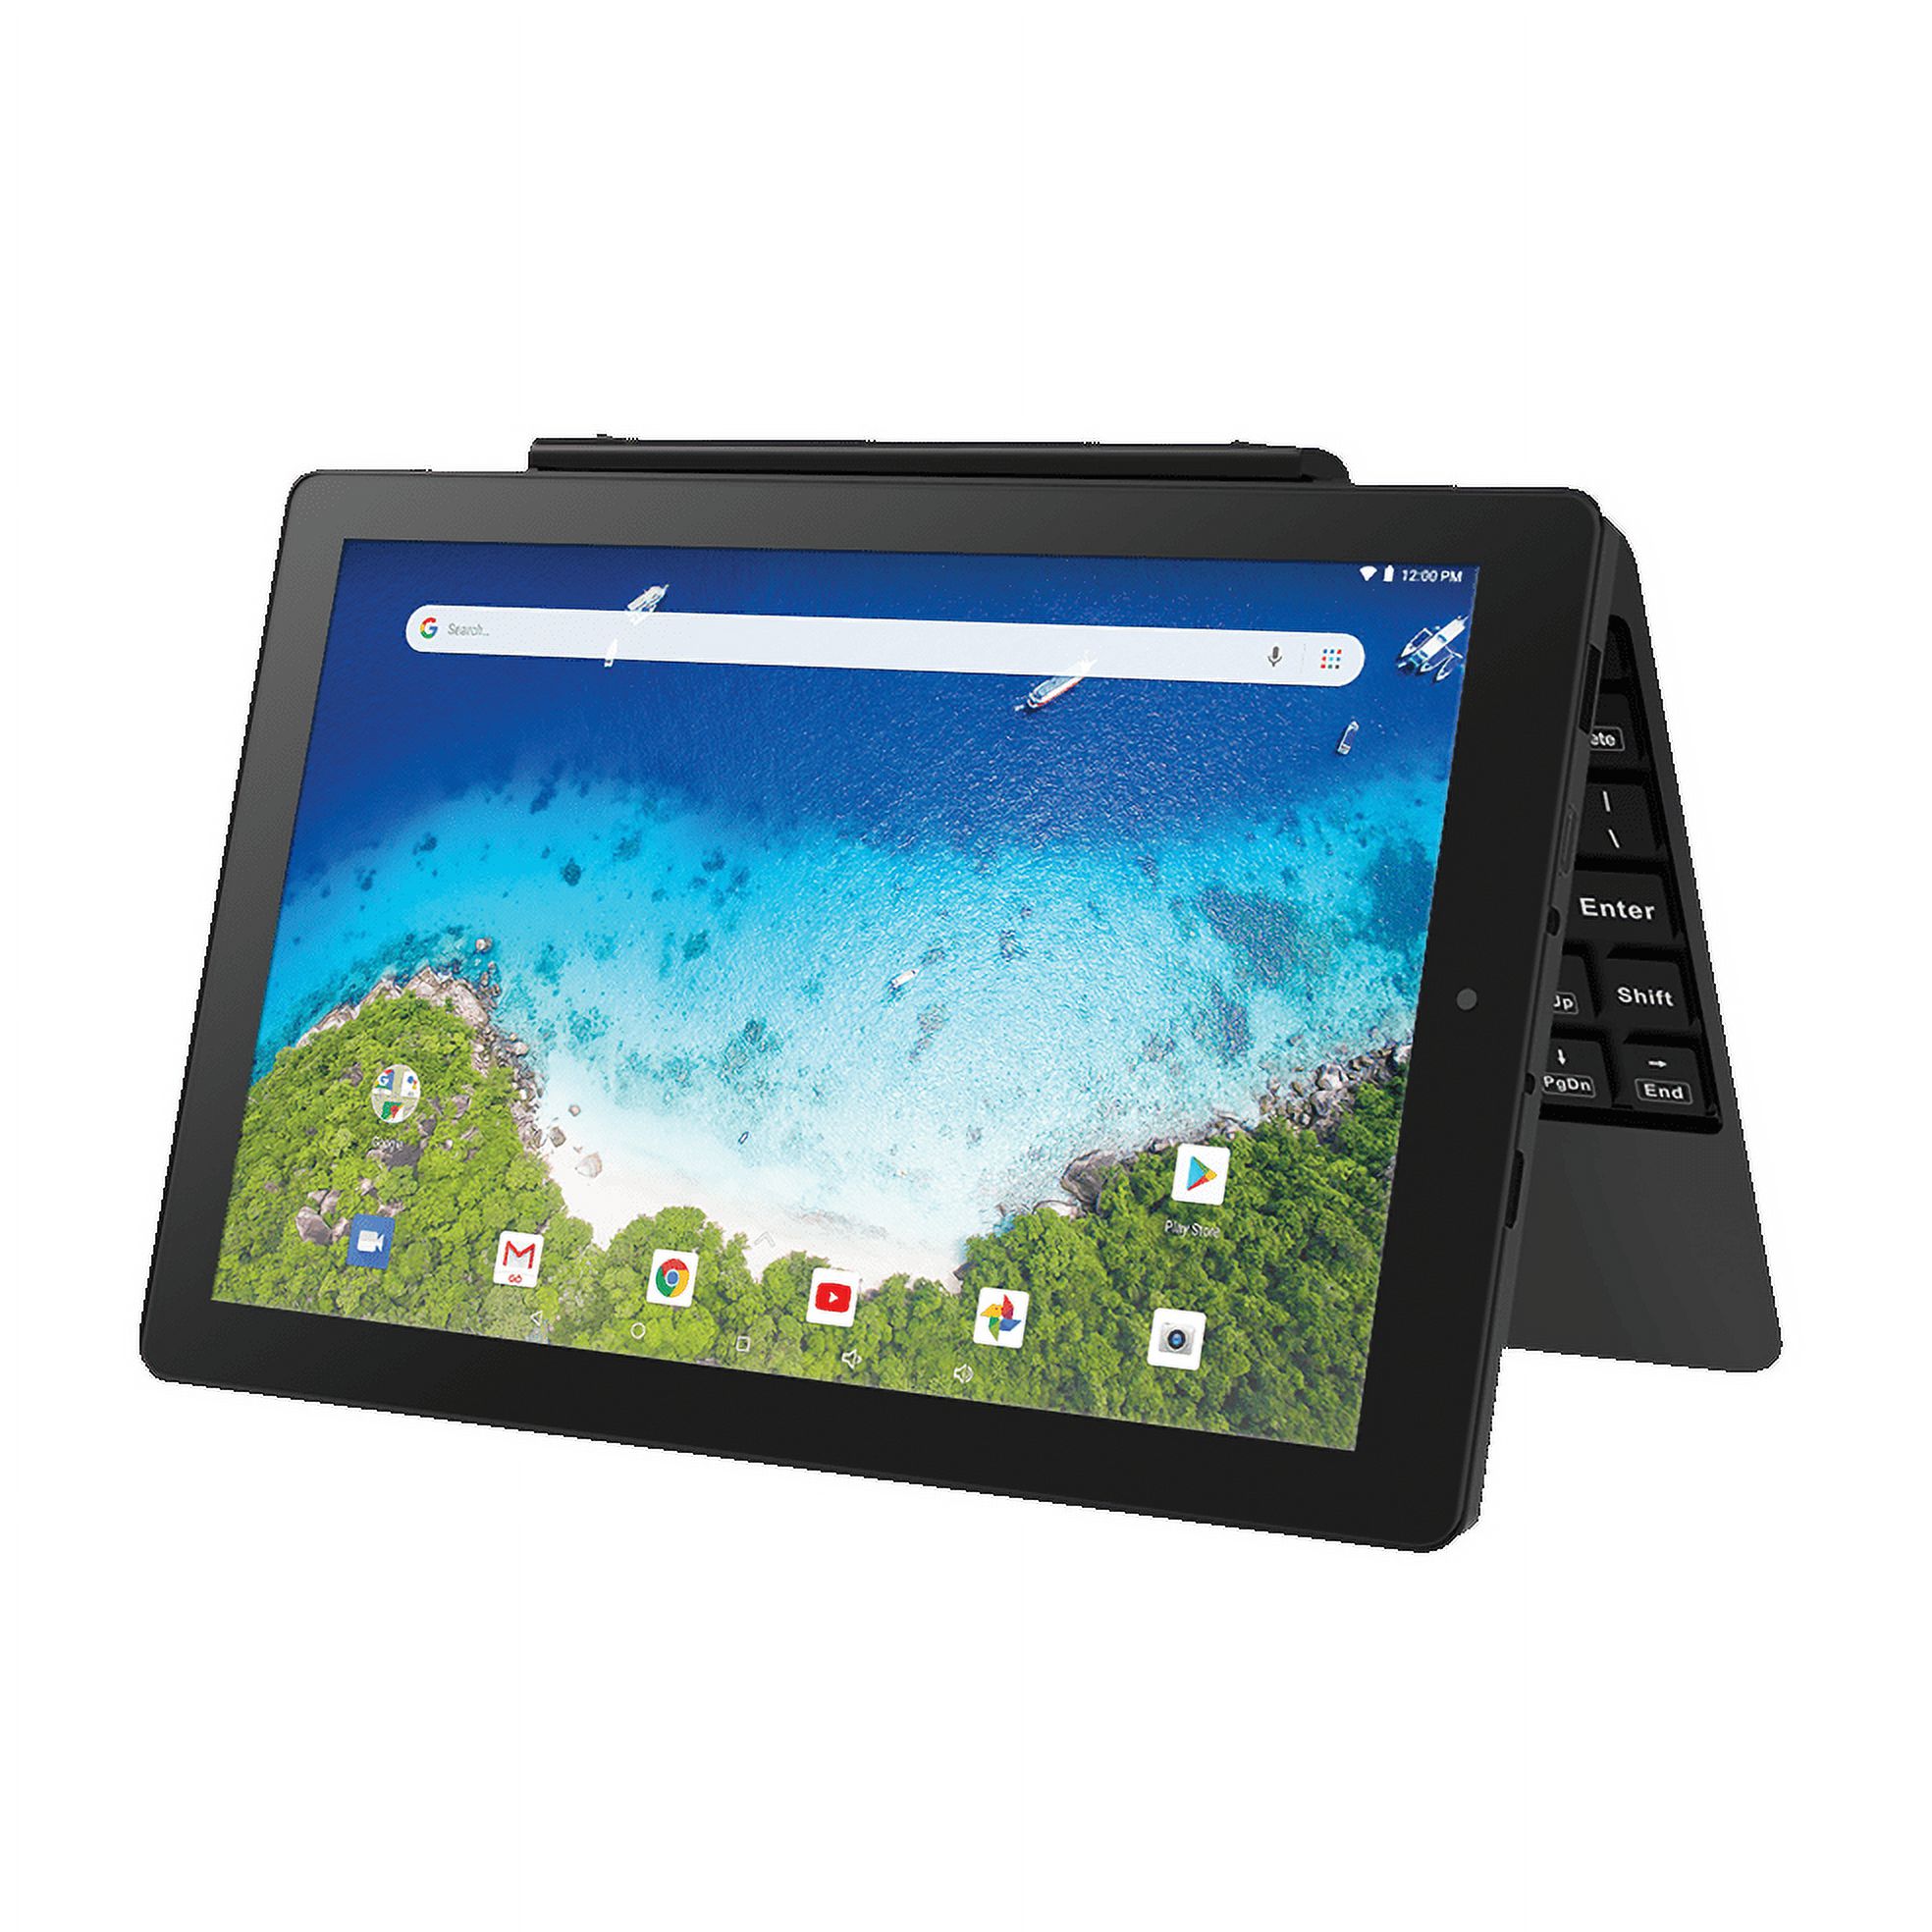 RCA Viking Pro 10.1" Android 2-in-1 Tablet 32GB Quad Core, Charcoal (Google Classroom Ready) - image 1 of 4